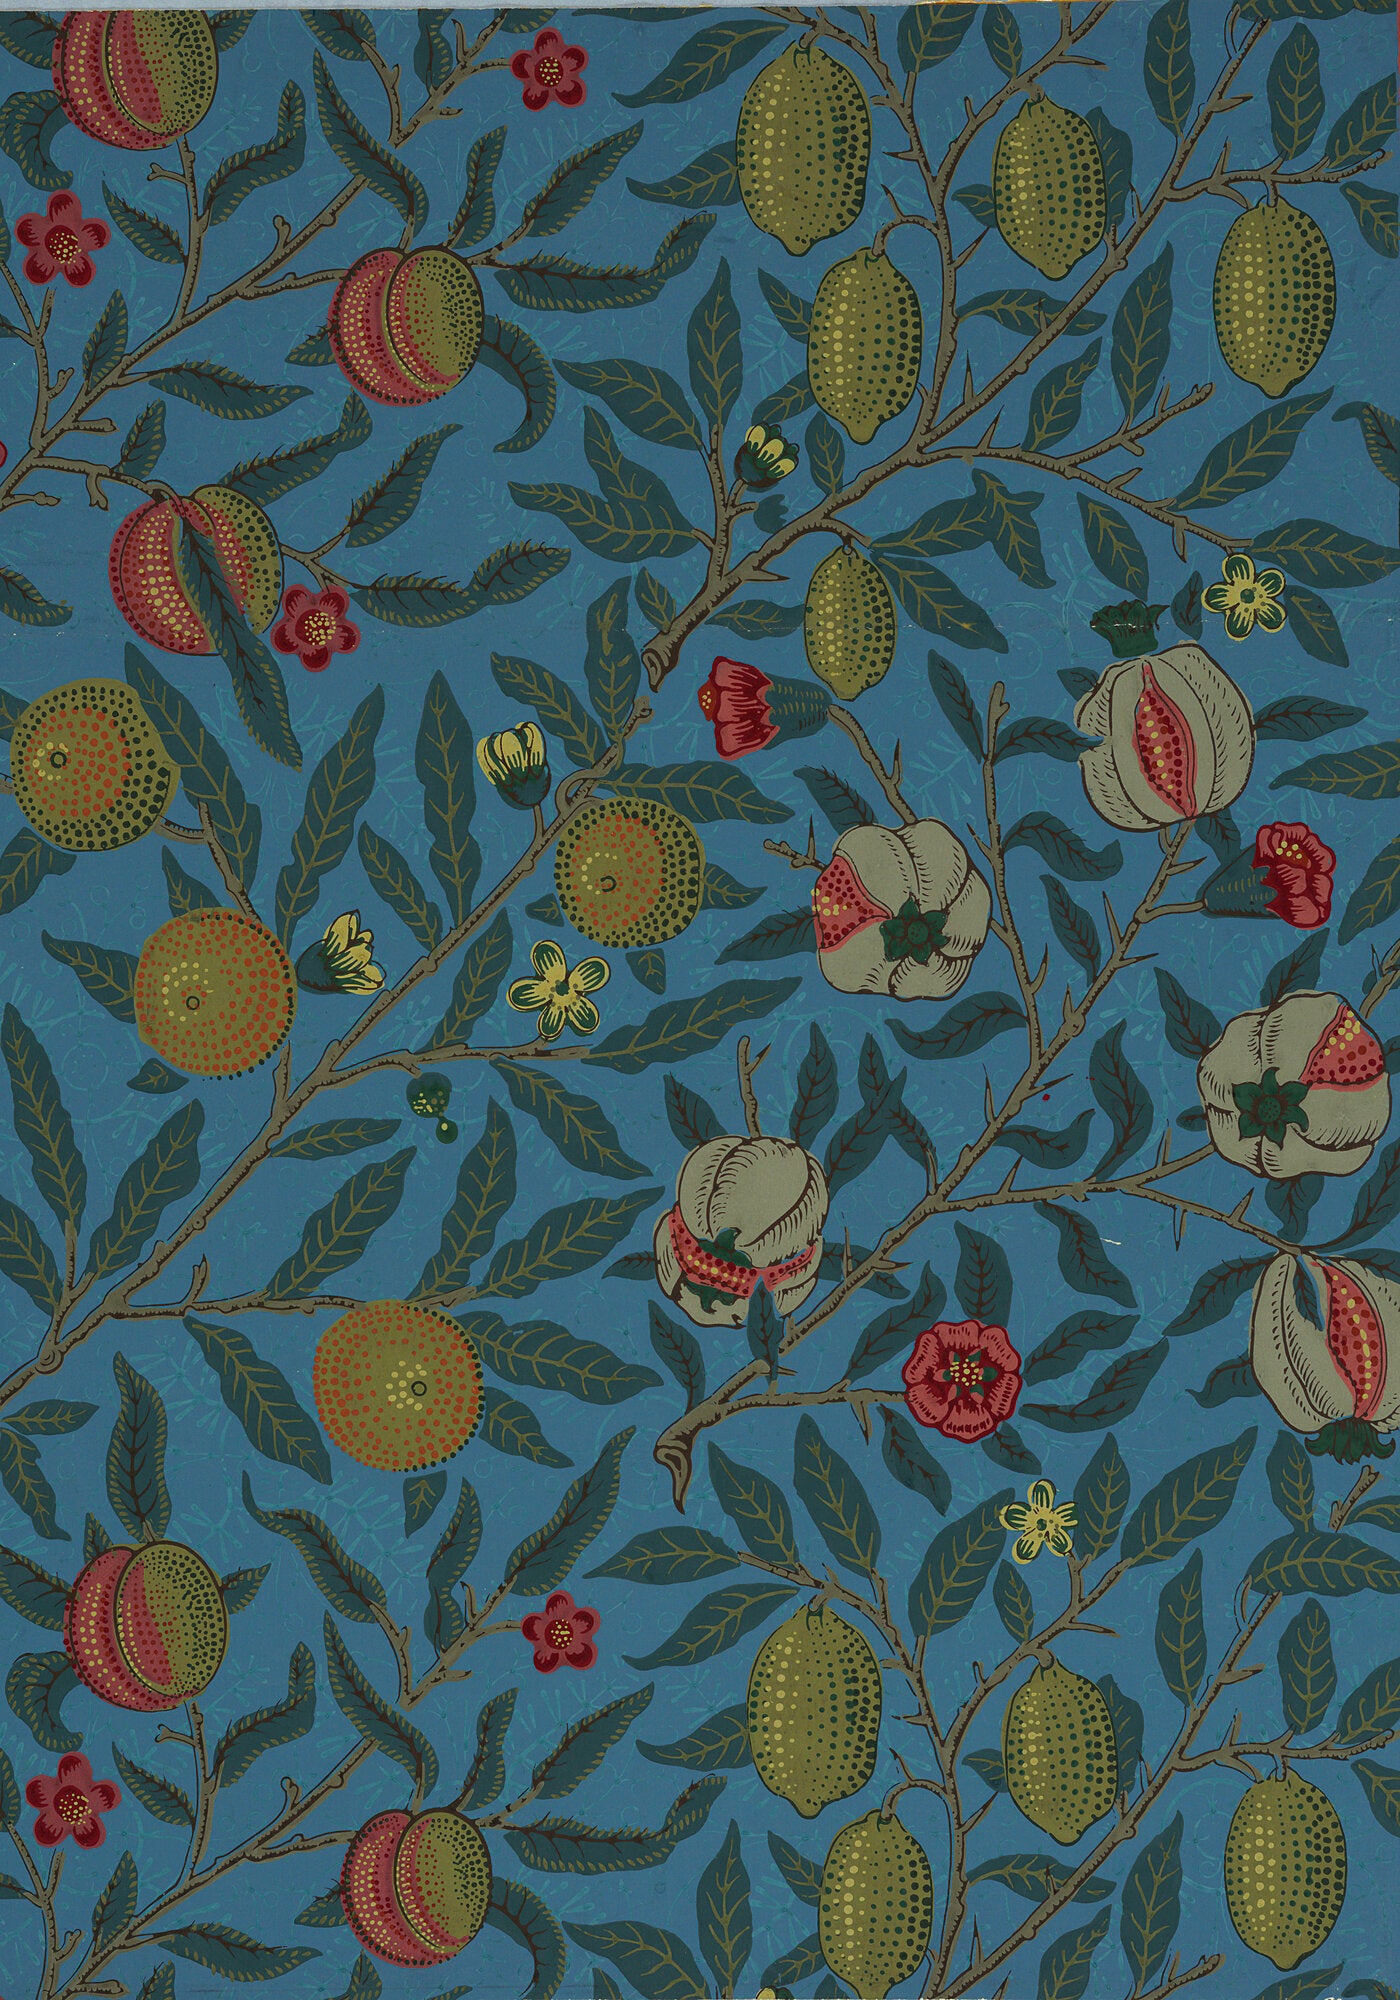 Pomegranate or Four Fruits by William Morris, 1862 - Wrapping Paper - 70x100.